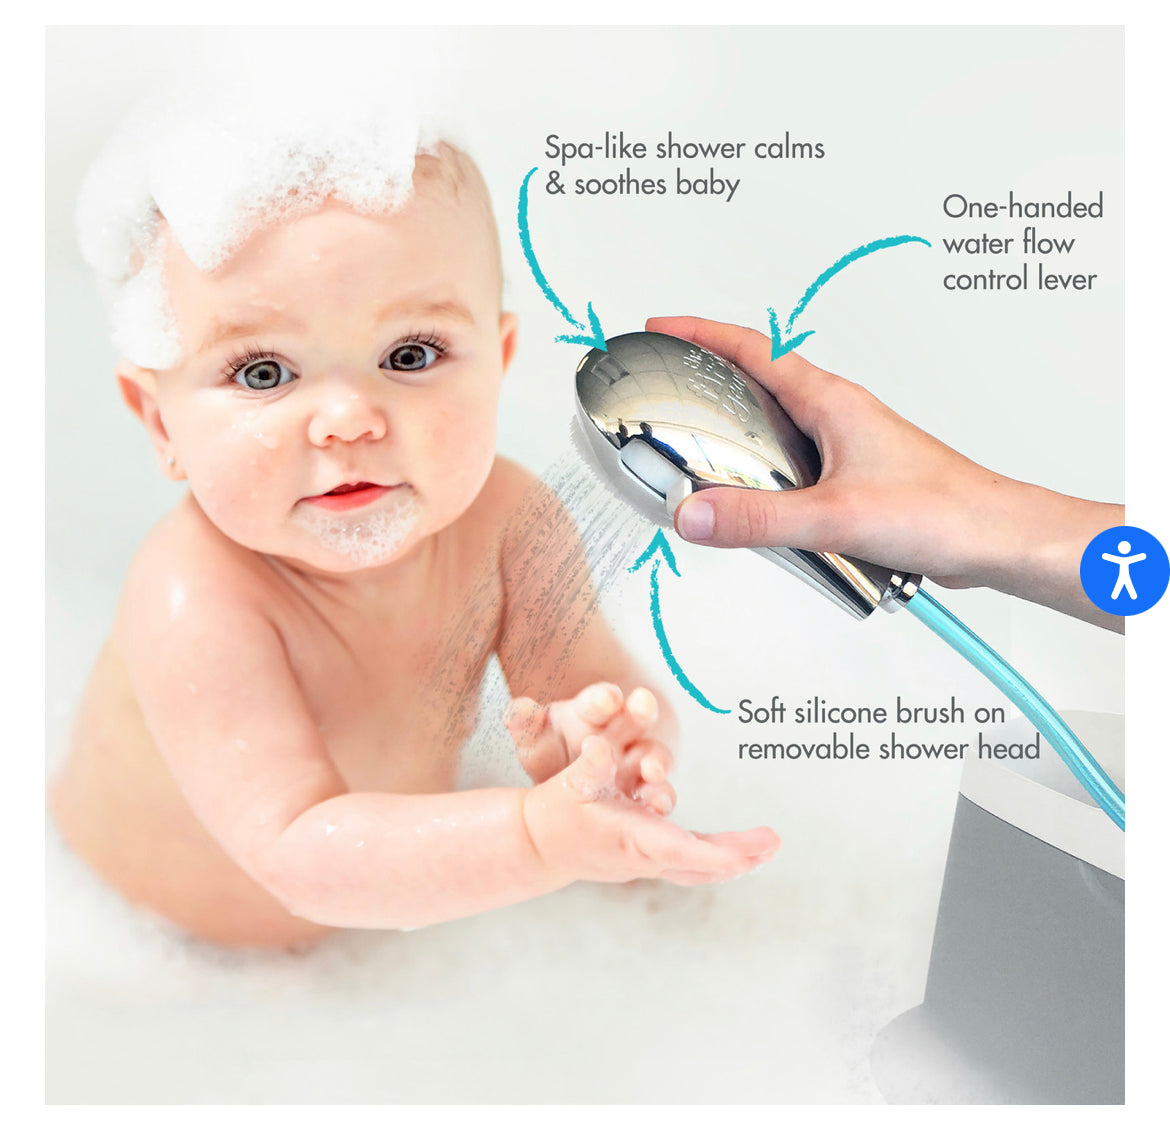 The First Years Rain Shower Baby Spa with Soothing Spray Showerhead.